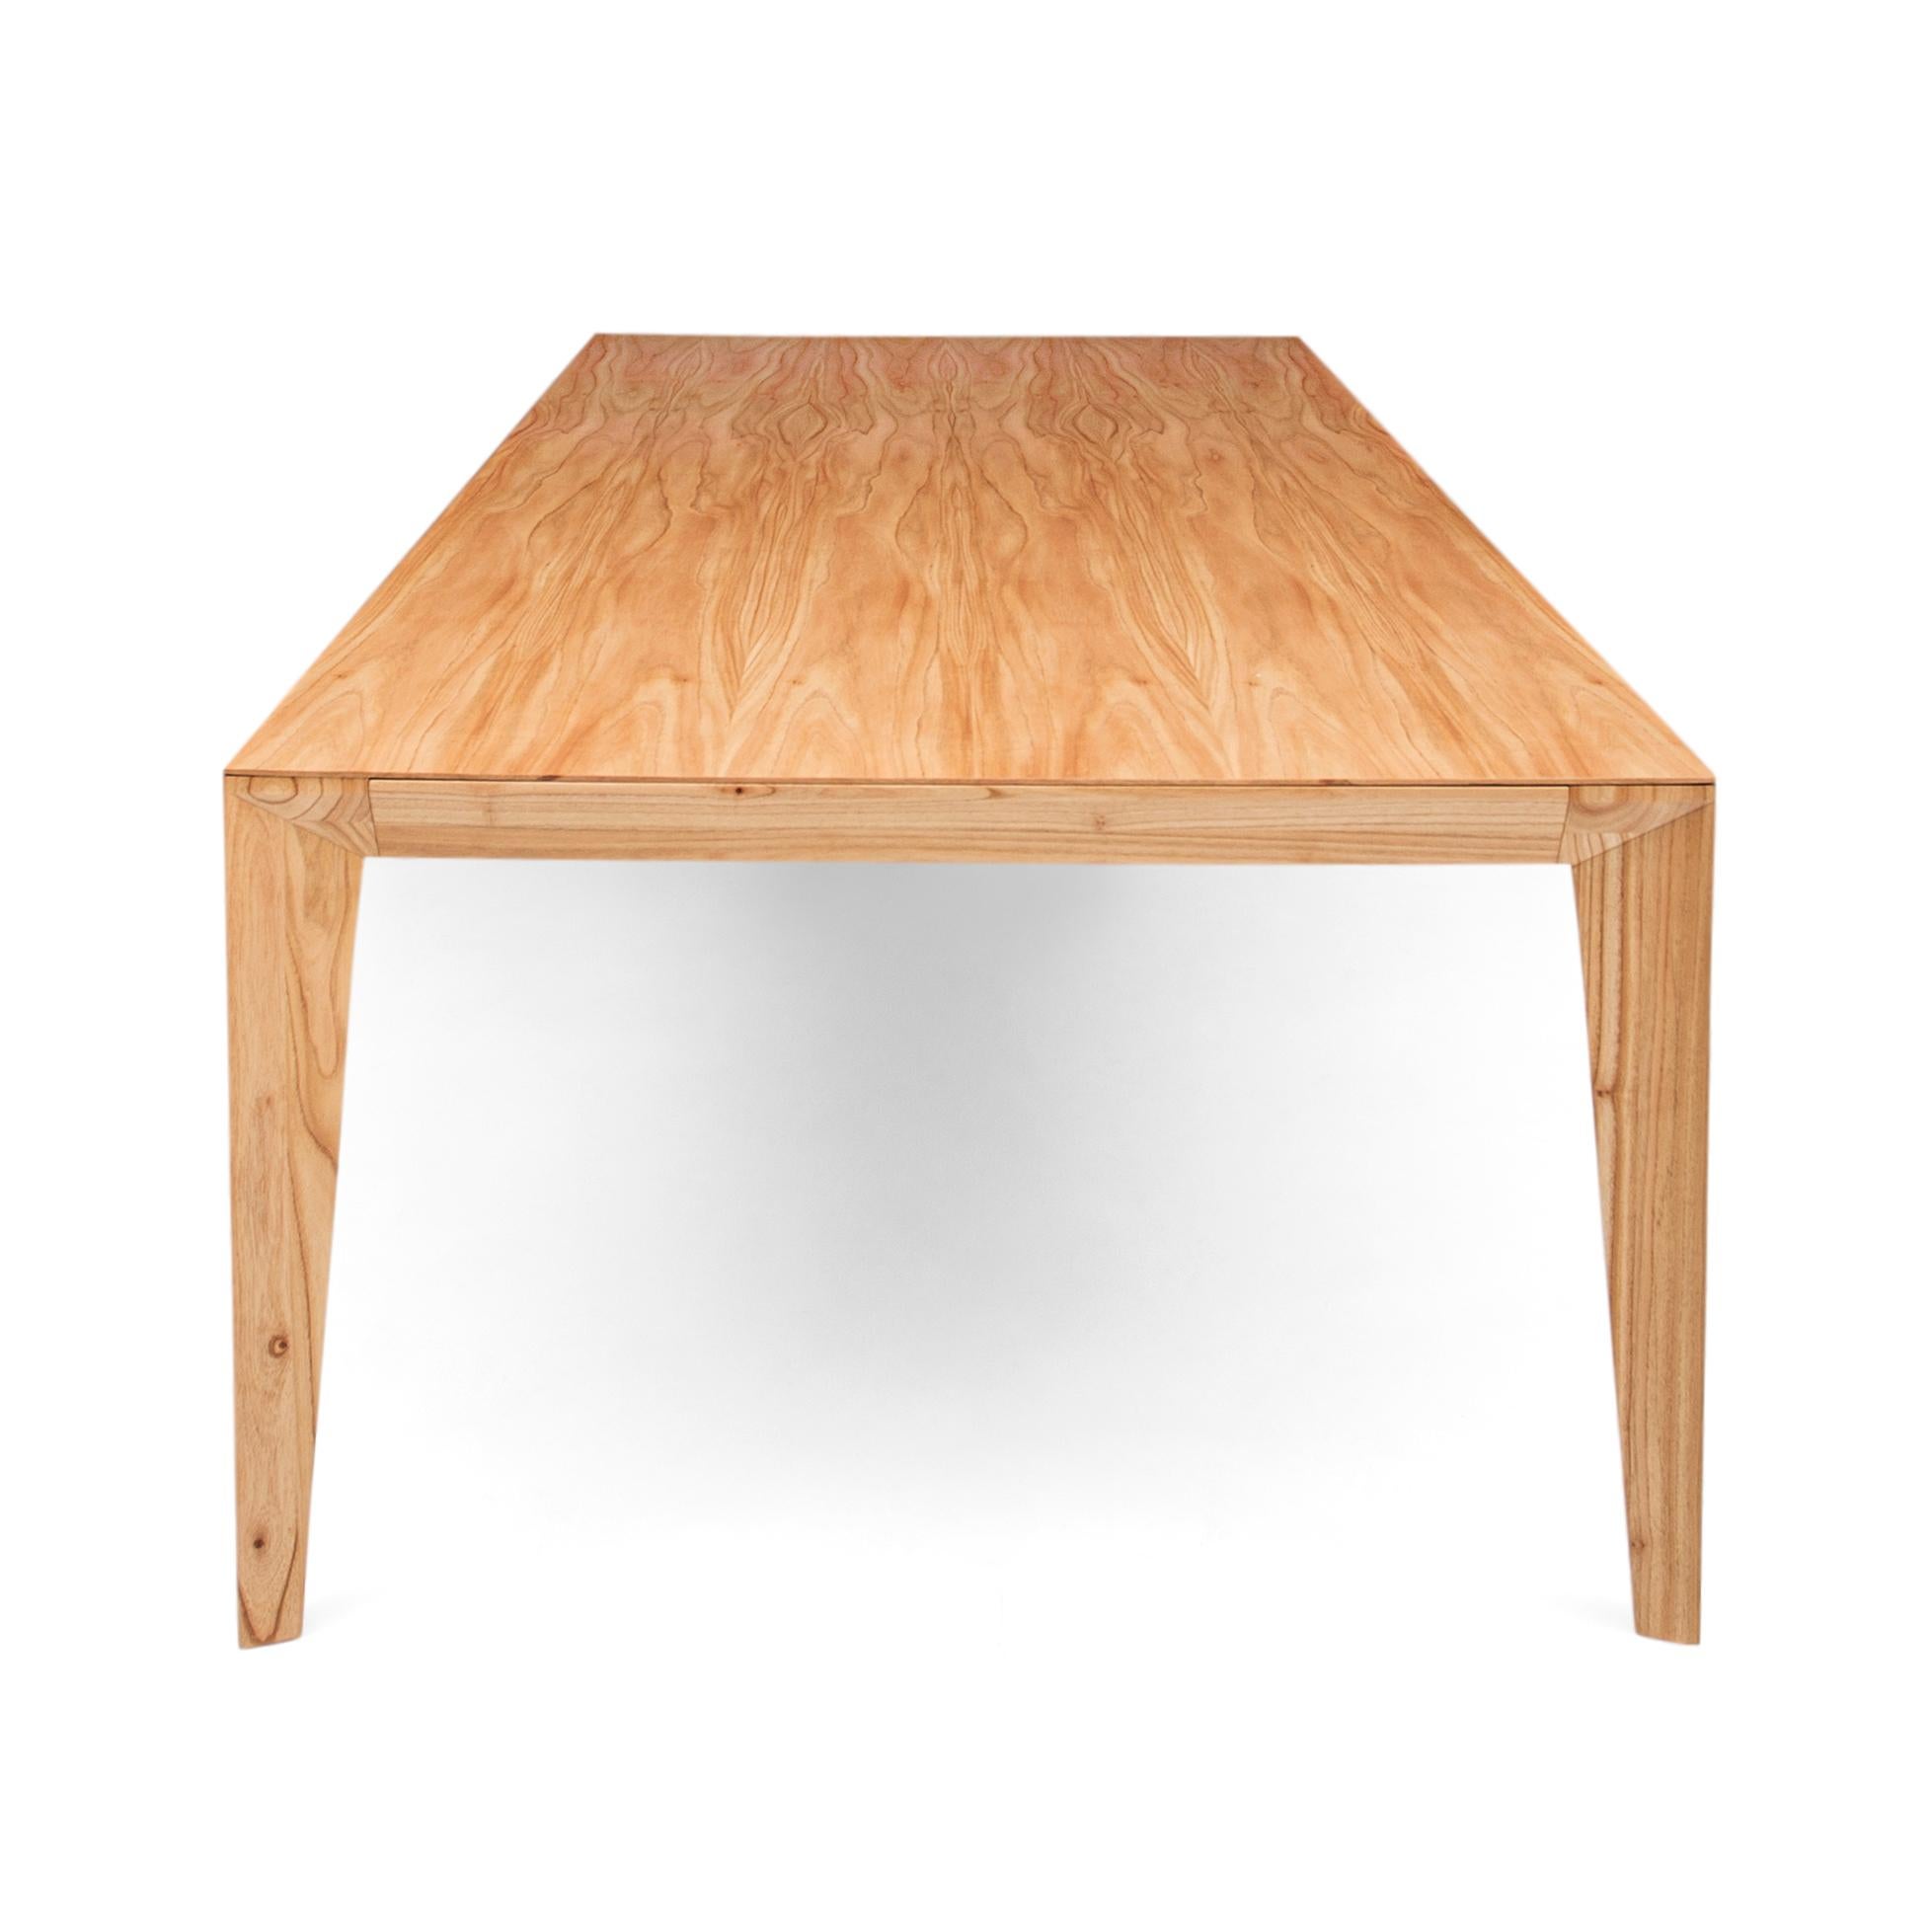 The Luce fining table brings together simplicity, elegance and beauty. Using beautiful Chinaberry wood, along with subtle design features such as stunning angular legs, the Luce 95